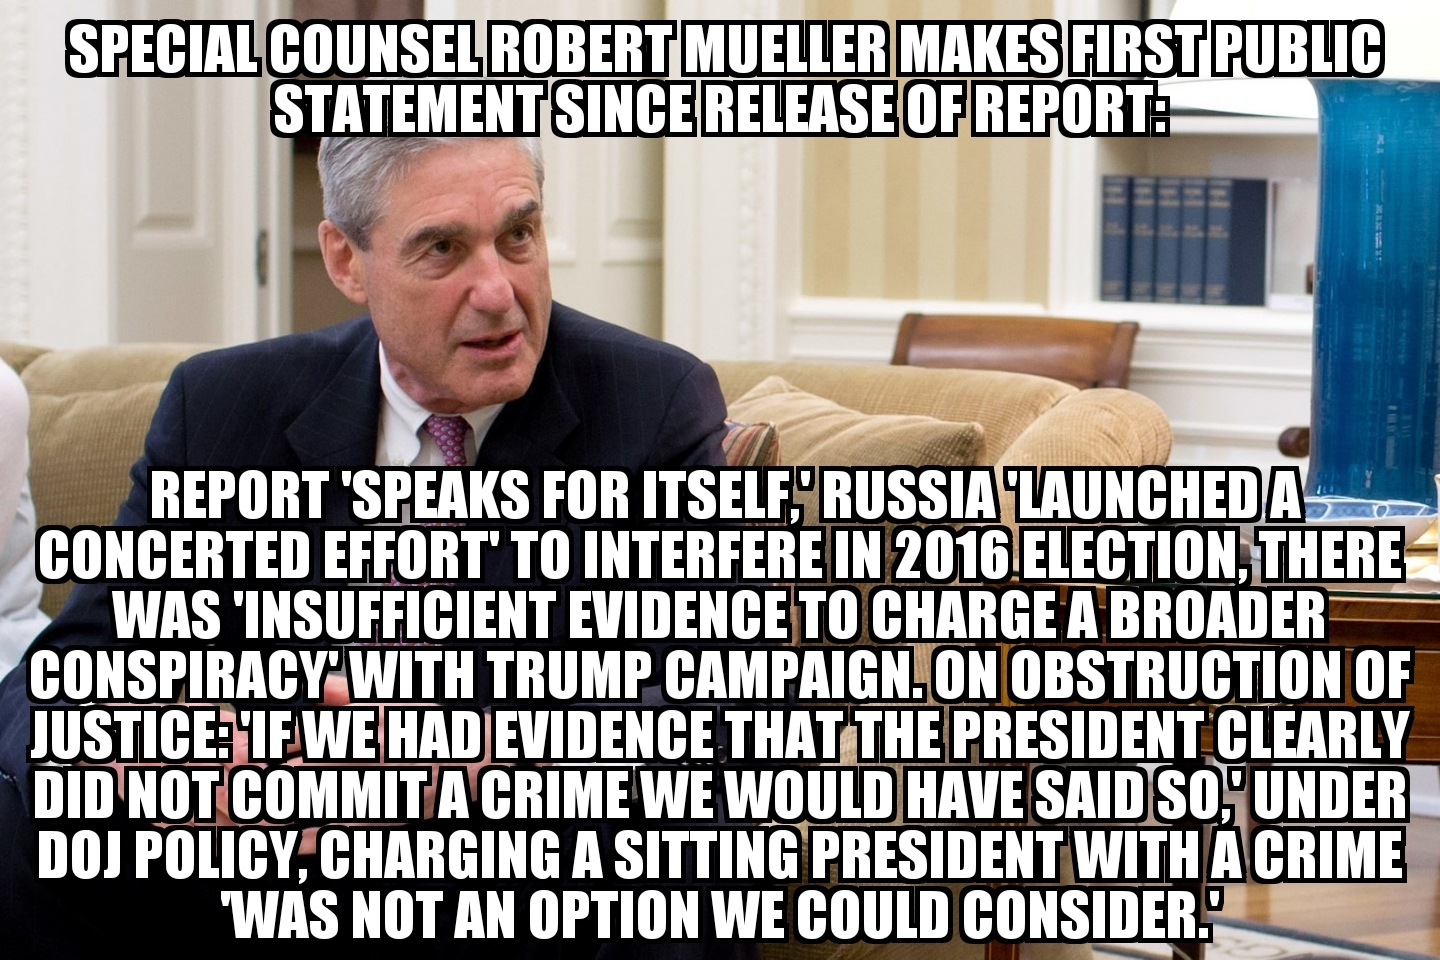 Robert Mueller makes first public statement on Special Counsel report